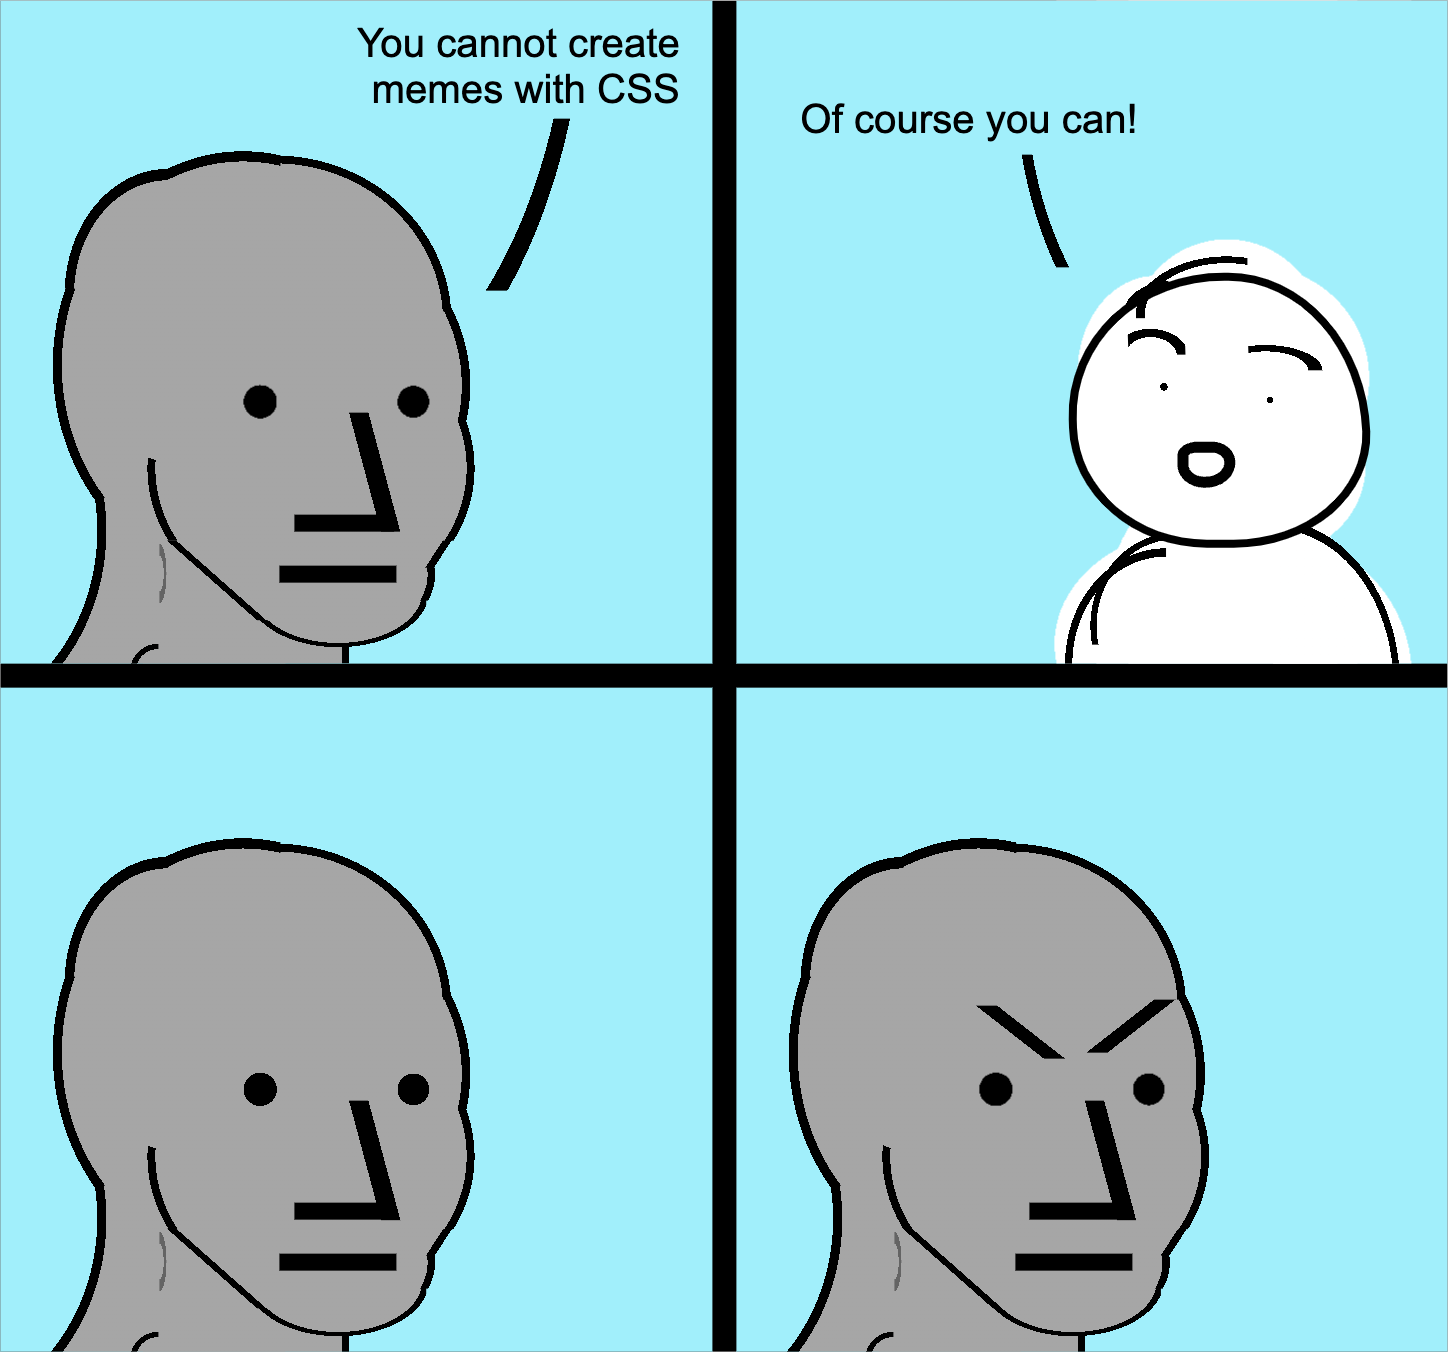 Poor version of the Angry Wojak meme showing 4 panels with two people talking. The first panel shows a person saying 'You cannot create memes in CSS'. The second panel has the other person replying 'Of course you can!' The third and fourth panels show the first person, first normal (without saying anything) and then with an angry look.